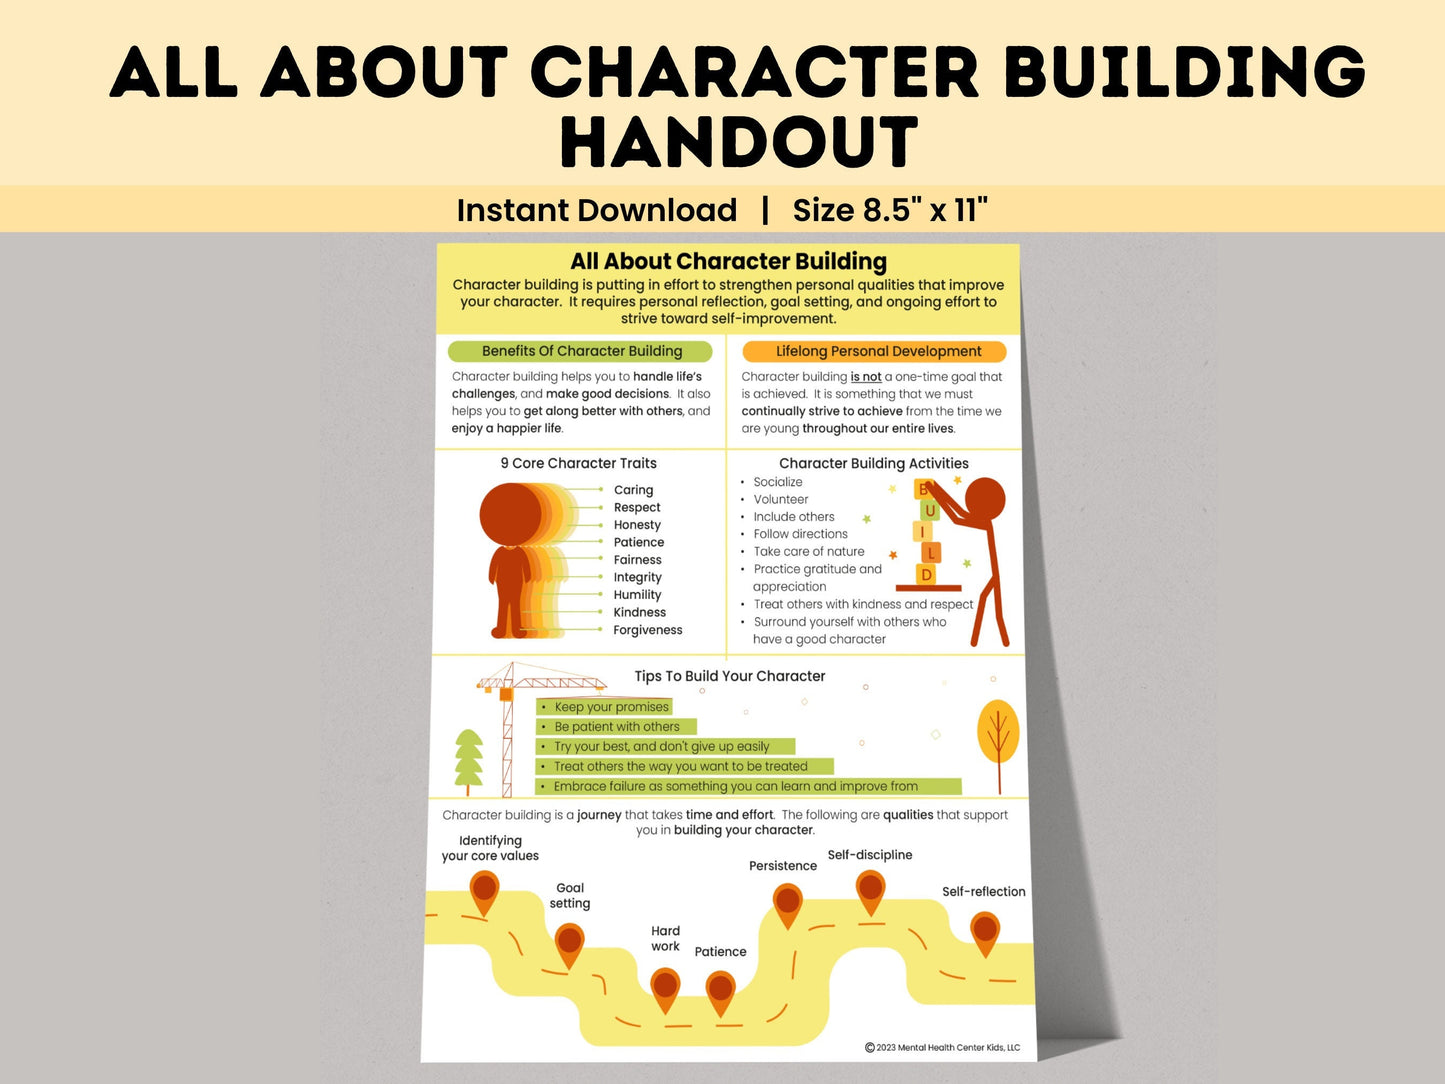 All About Character Building